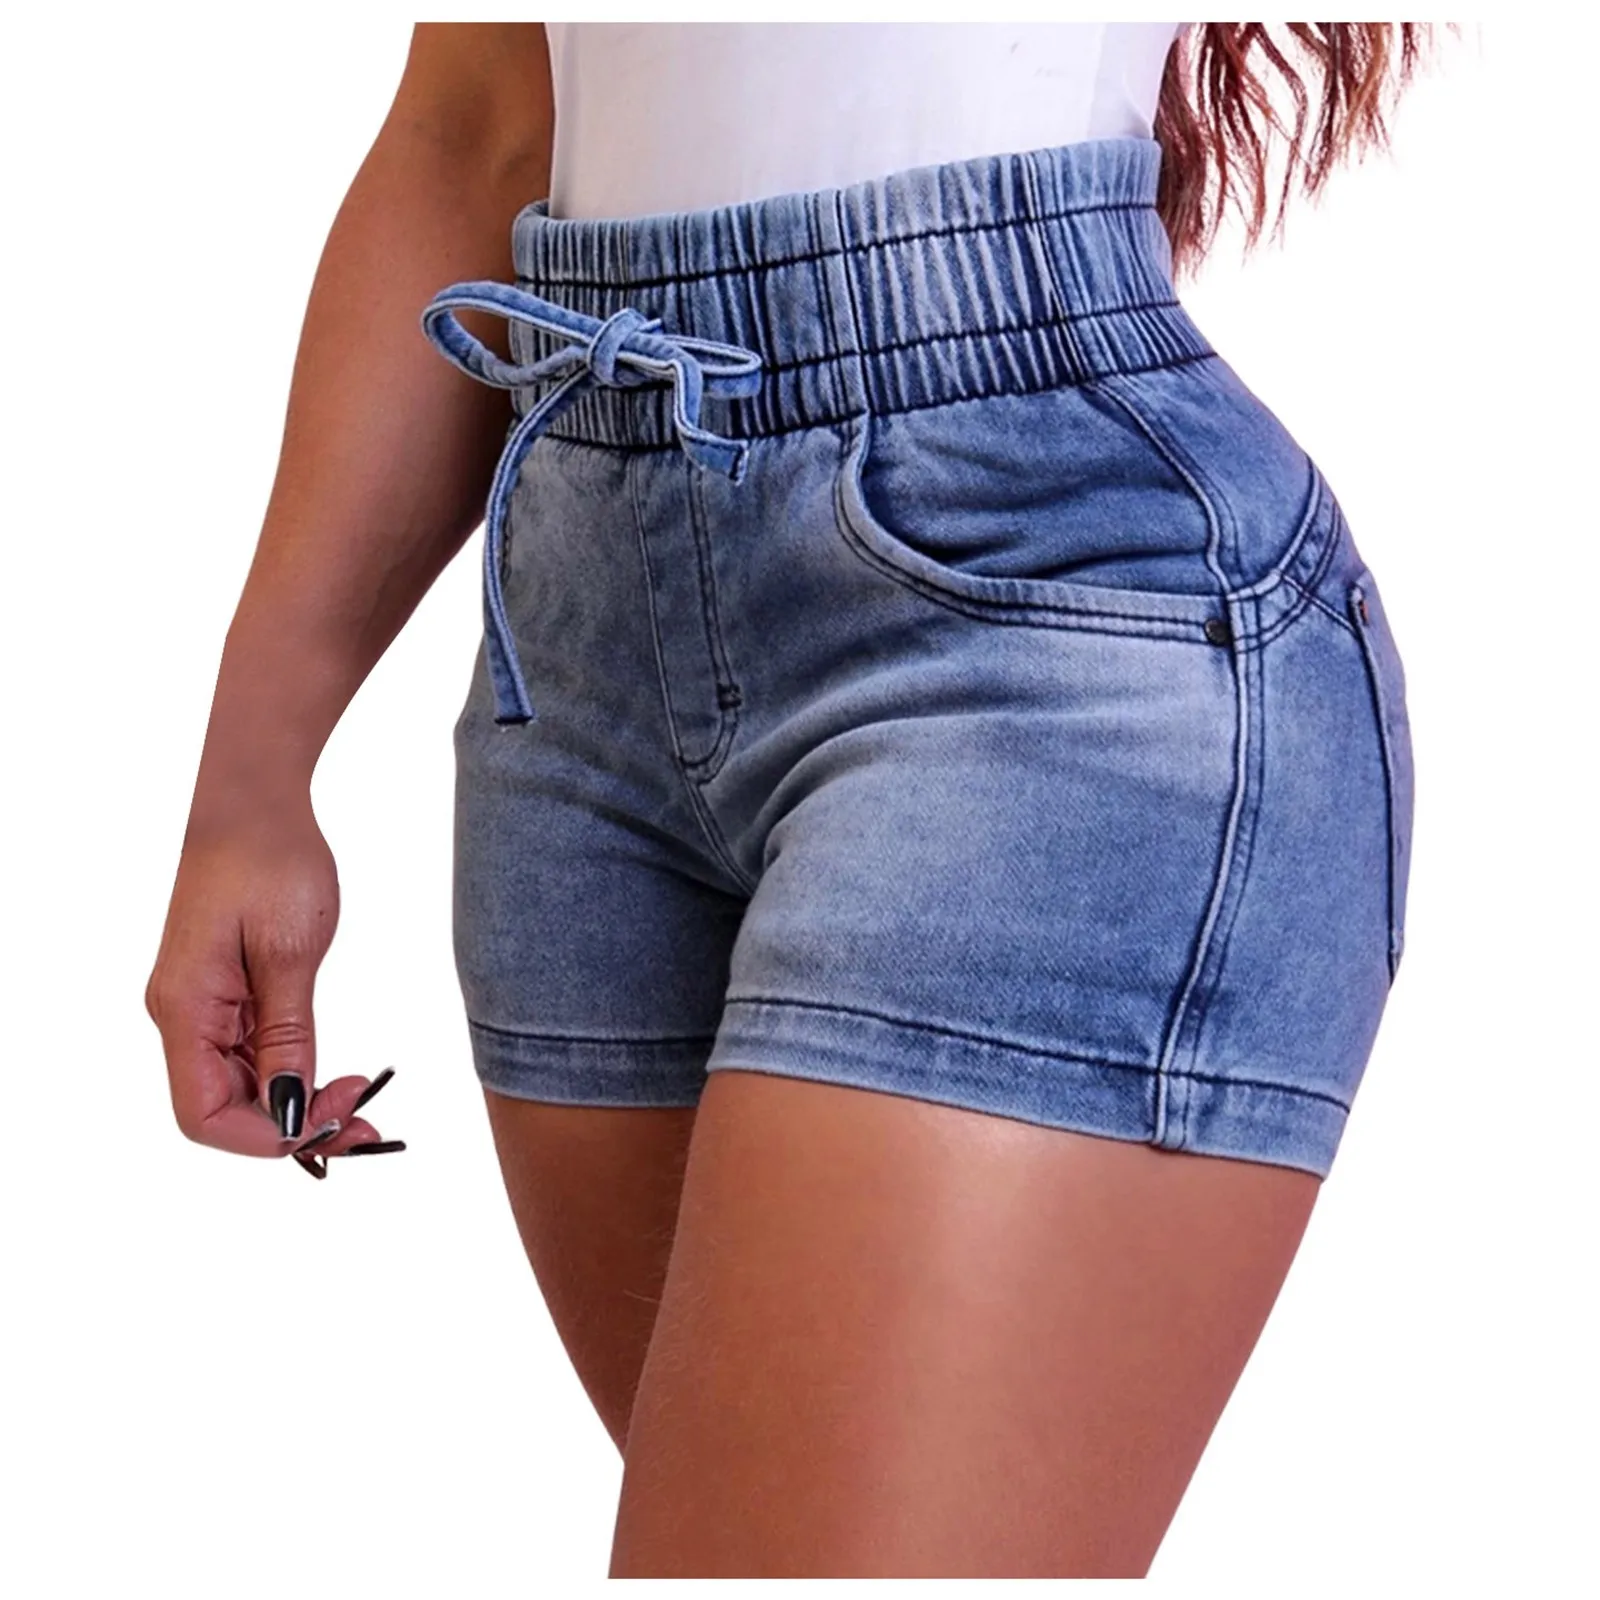 

Womens Designer Pants Women's Casual F Fashion Baggy High Waisted Jeans Thick Jean Leggings for Women Jean Jacket Flower Women